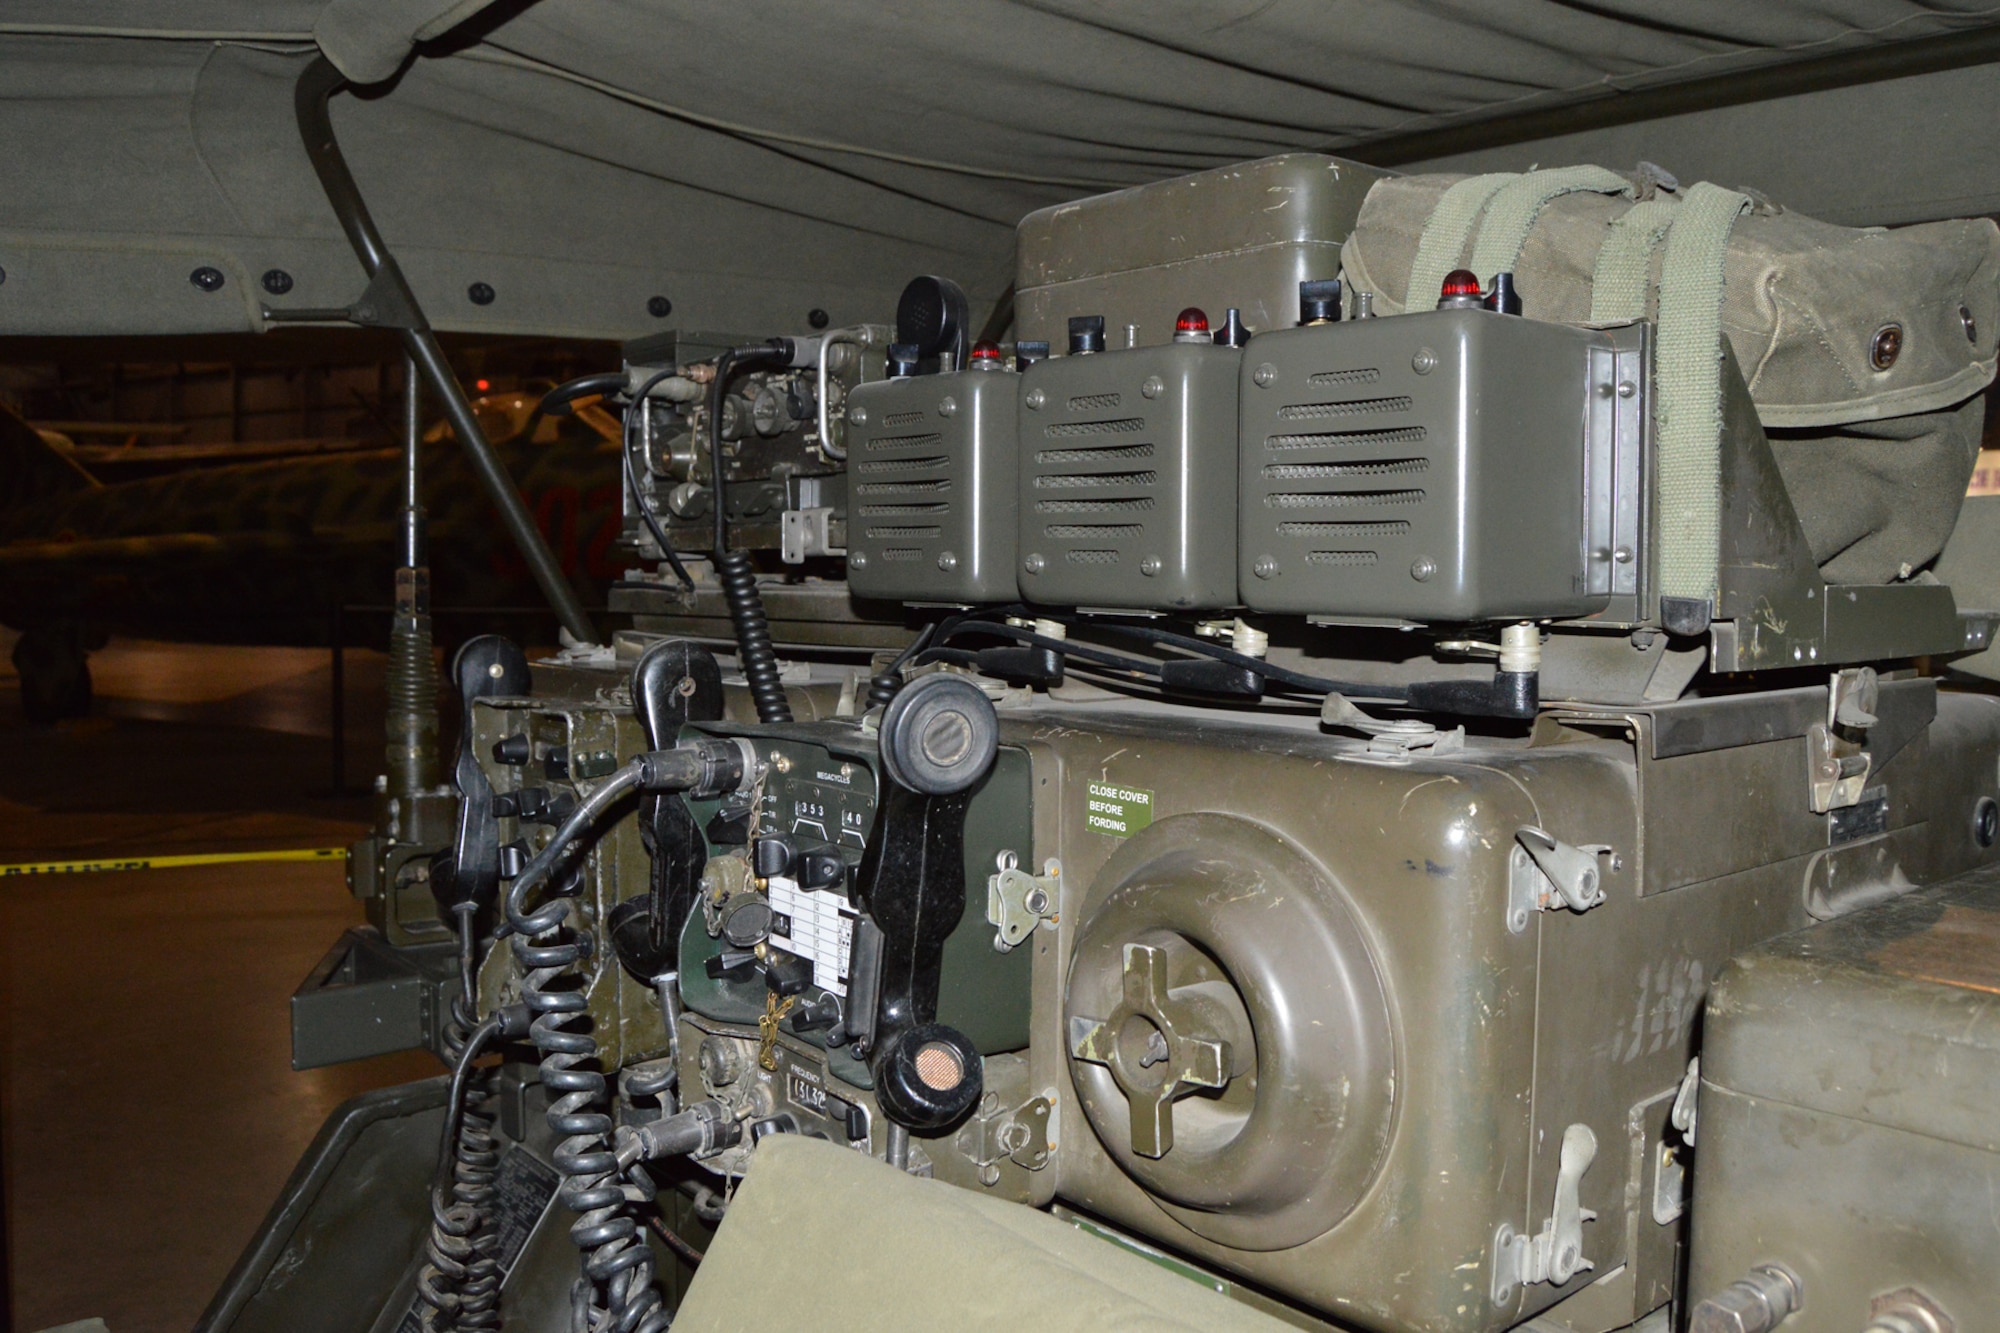 DAYTON, Ohio -- Interior of the AN/MRC-108 Communication System on display in the Southeast Asia War Gallery at the National Museum of the U.S. Air Force. (U.S. Air Force photo) 
